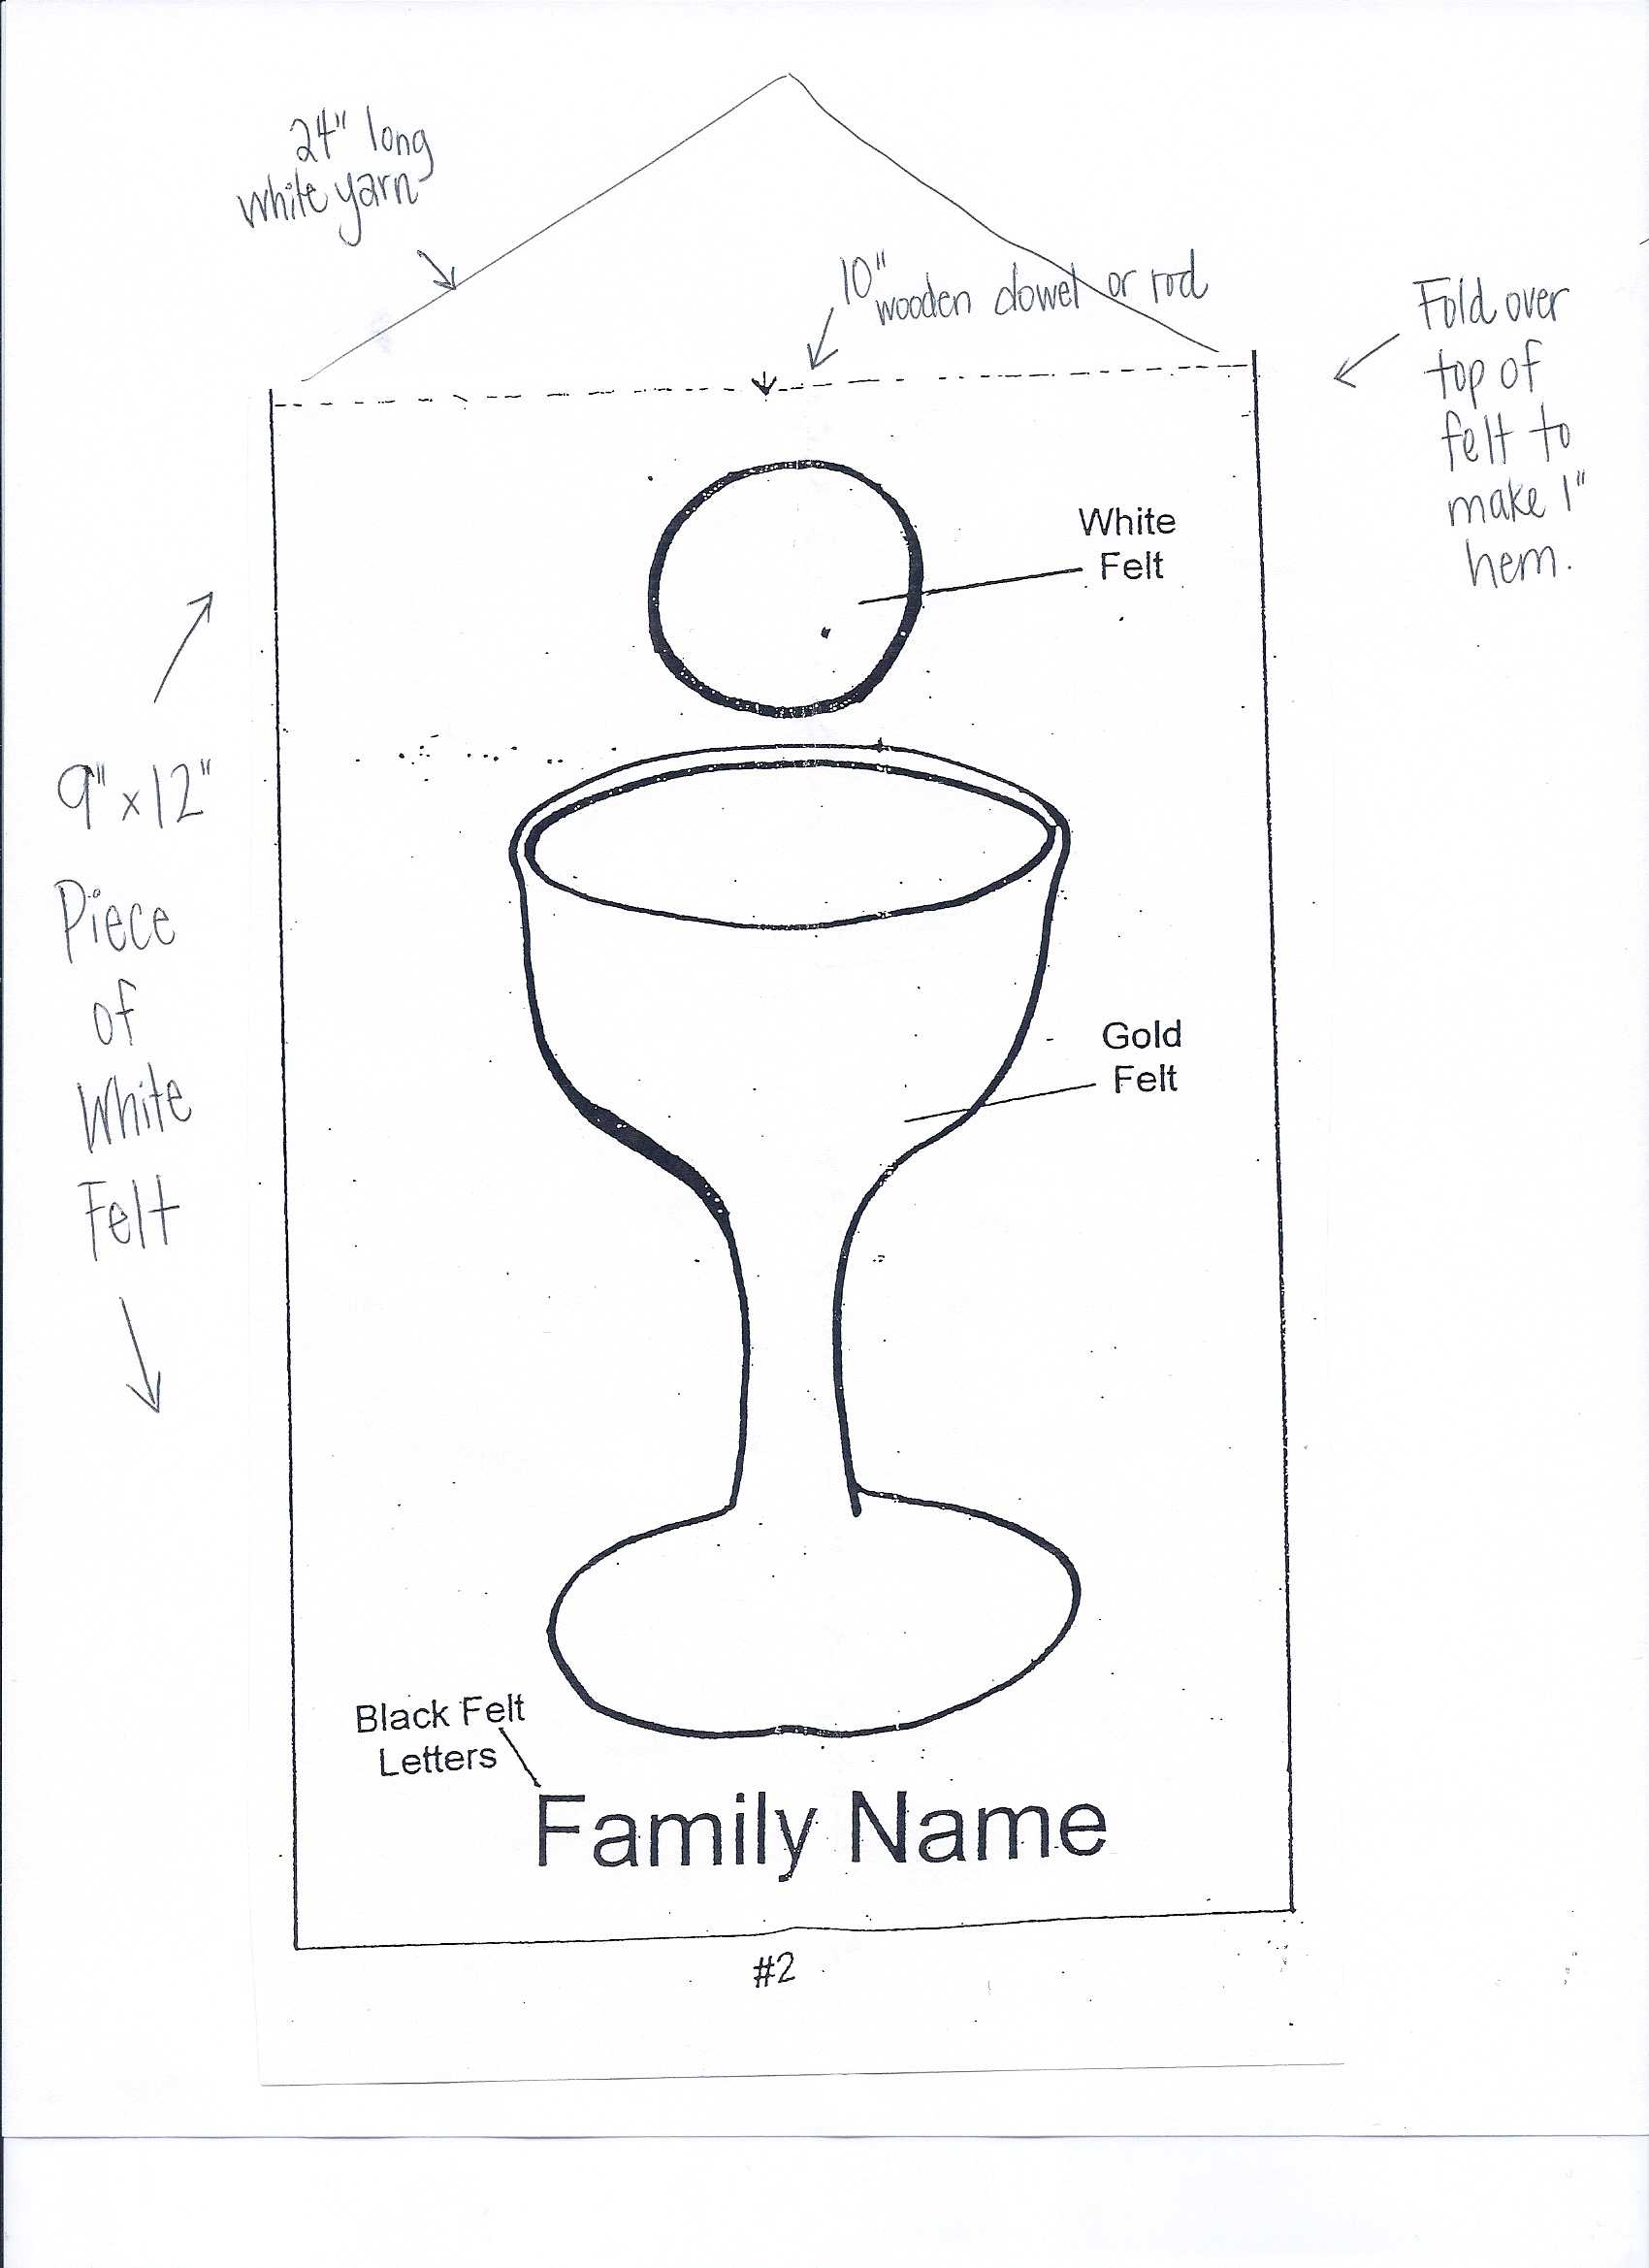 First Communion Banner Templates Bing Images. 1000 Images For First Communion Banner Templates